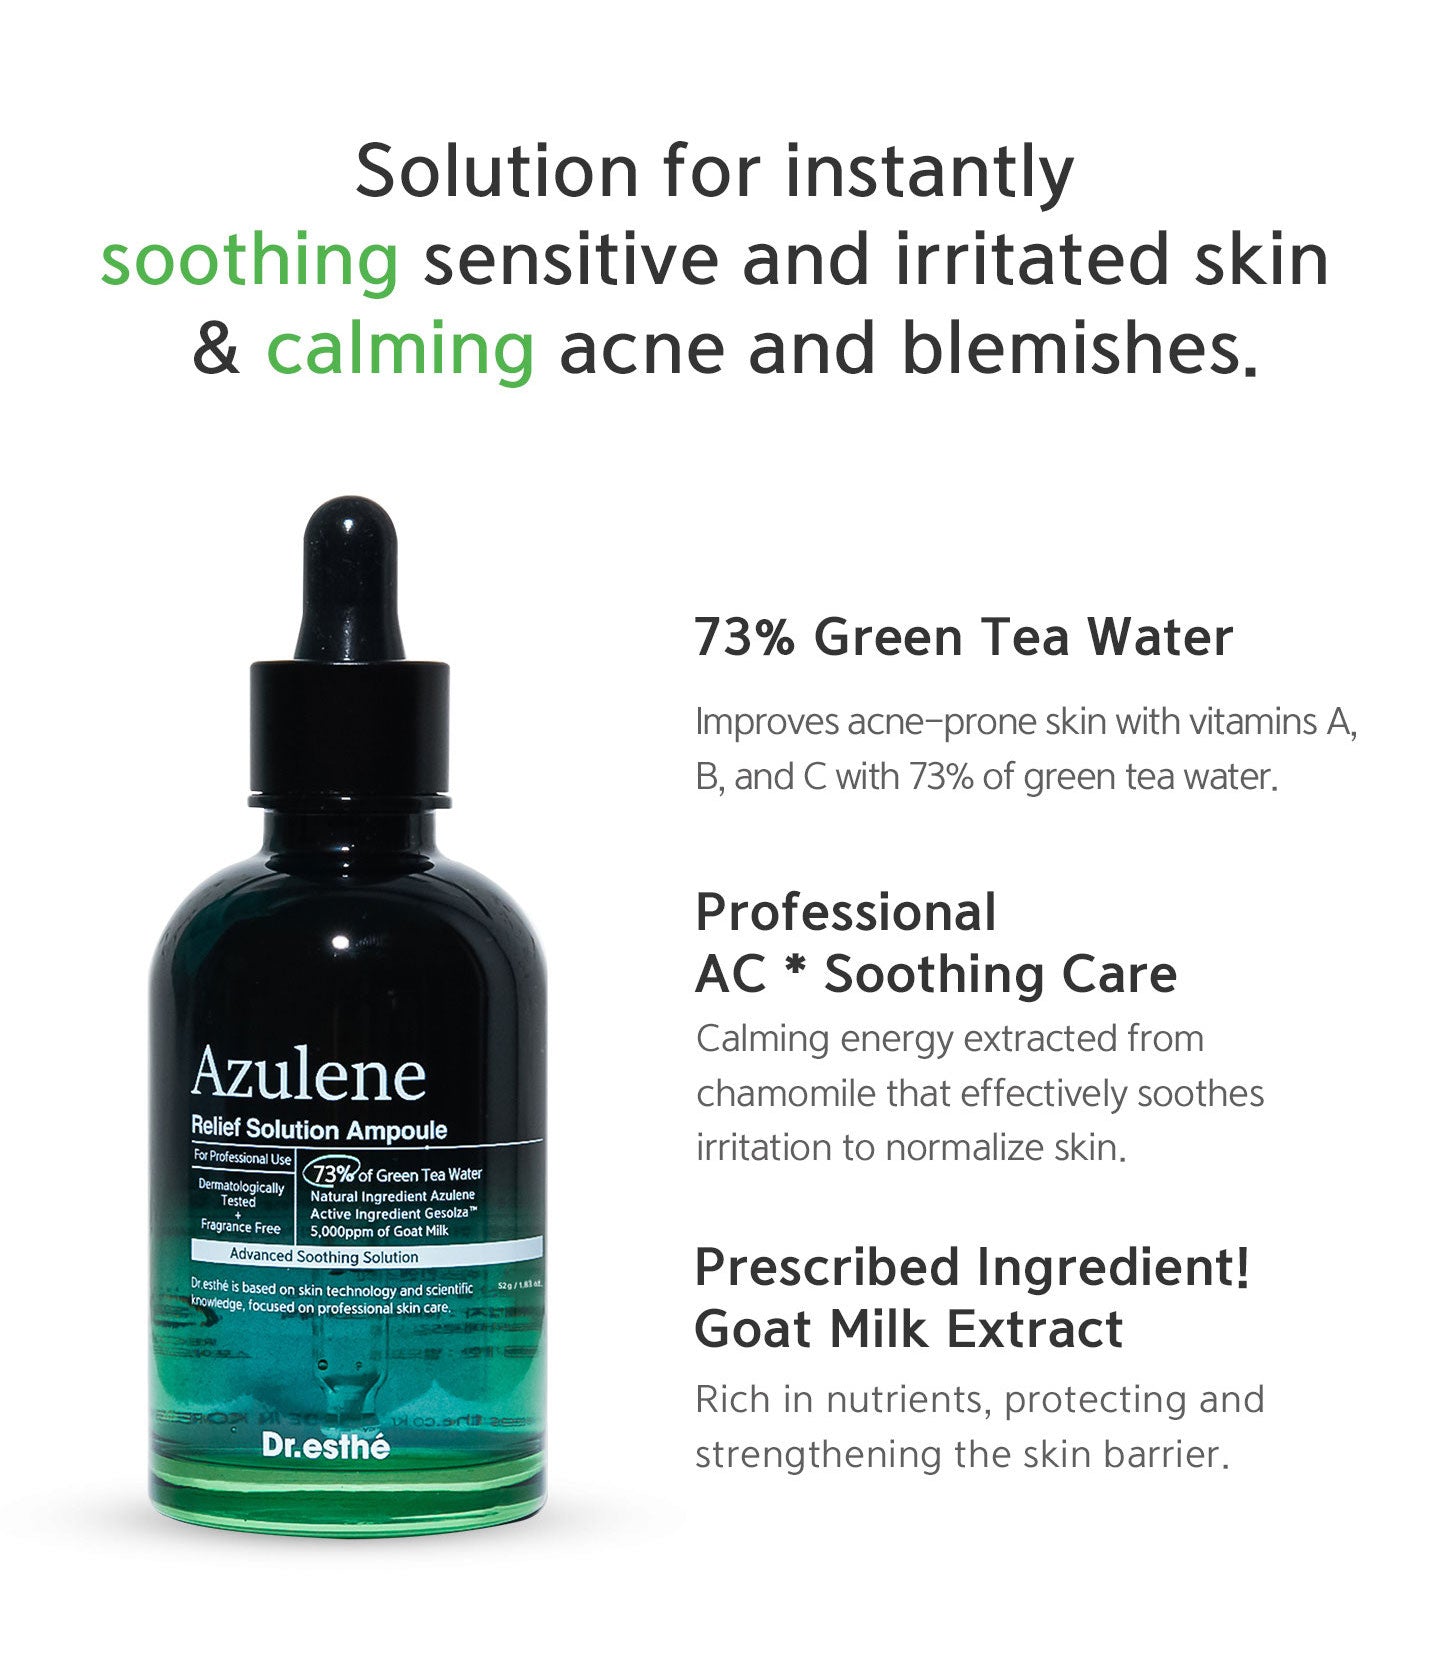 Solution for instantly soothing sensitive and irritated skin & calming acne and blemishes. 73% green tea water improves acne-prone skin with vitamin A, B and C, professional ac soothing care, prescribed ingredient: goat milk extract. 